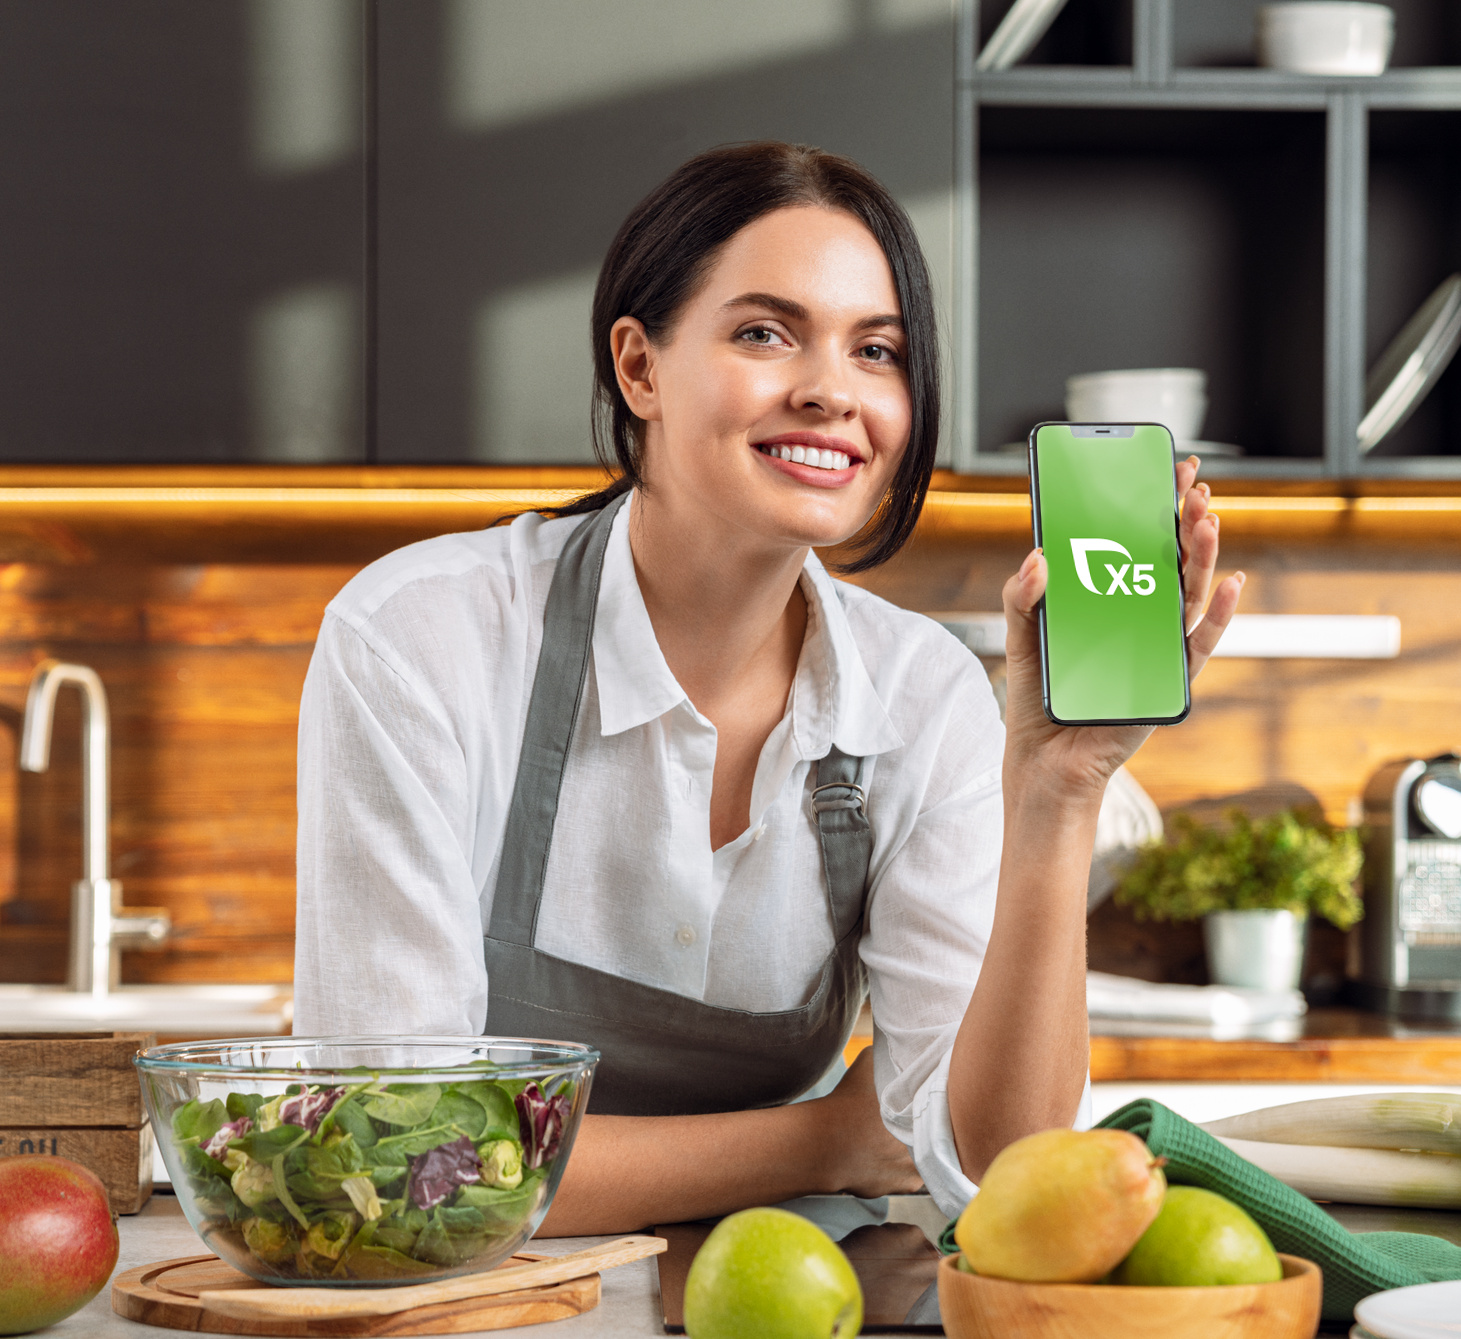 Woman in the kitchen leans on the table with ingredients smiling and shows the phone with the X5 logo